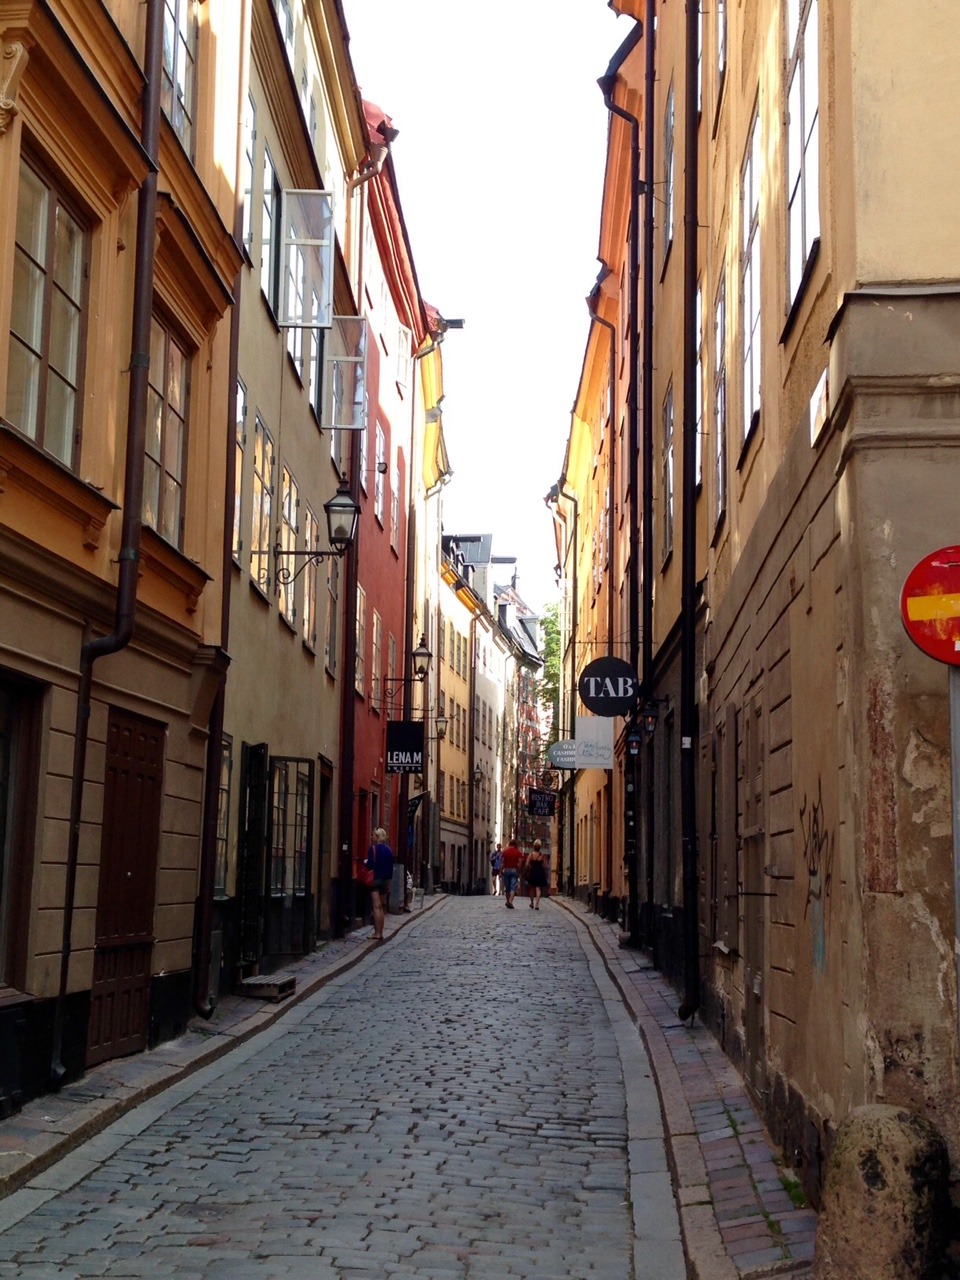 Don’t Miss Out on Stockholm’s Old Town!